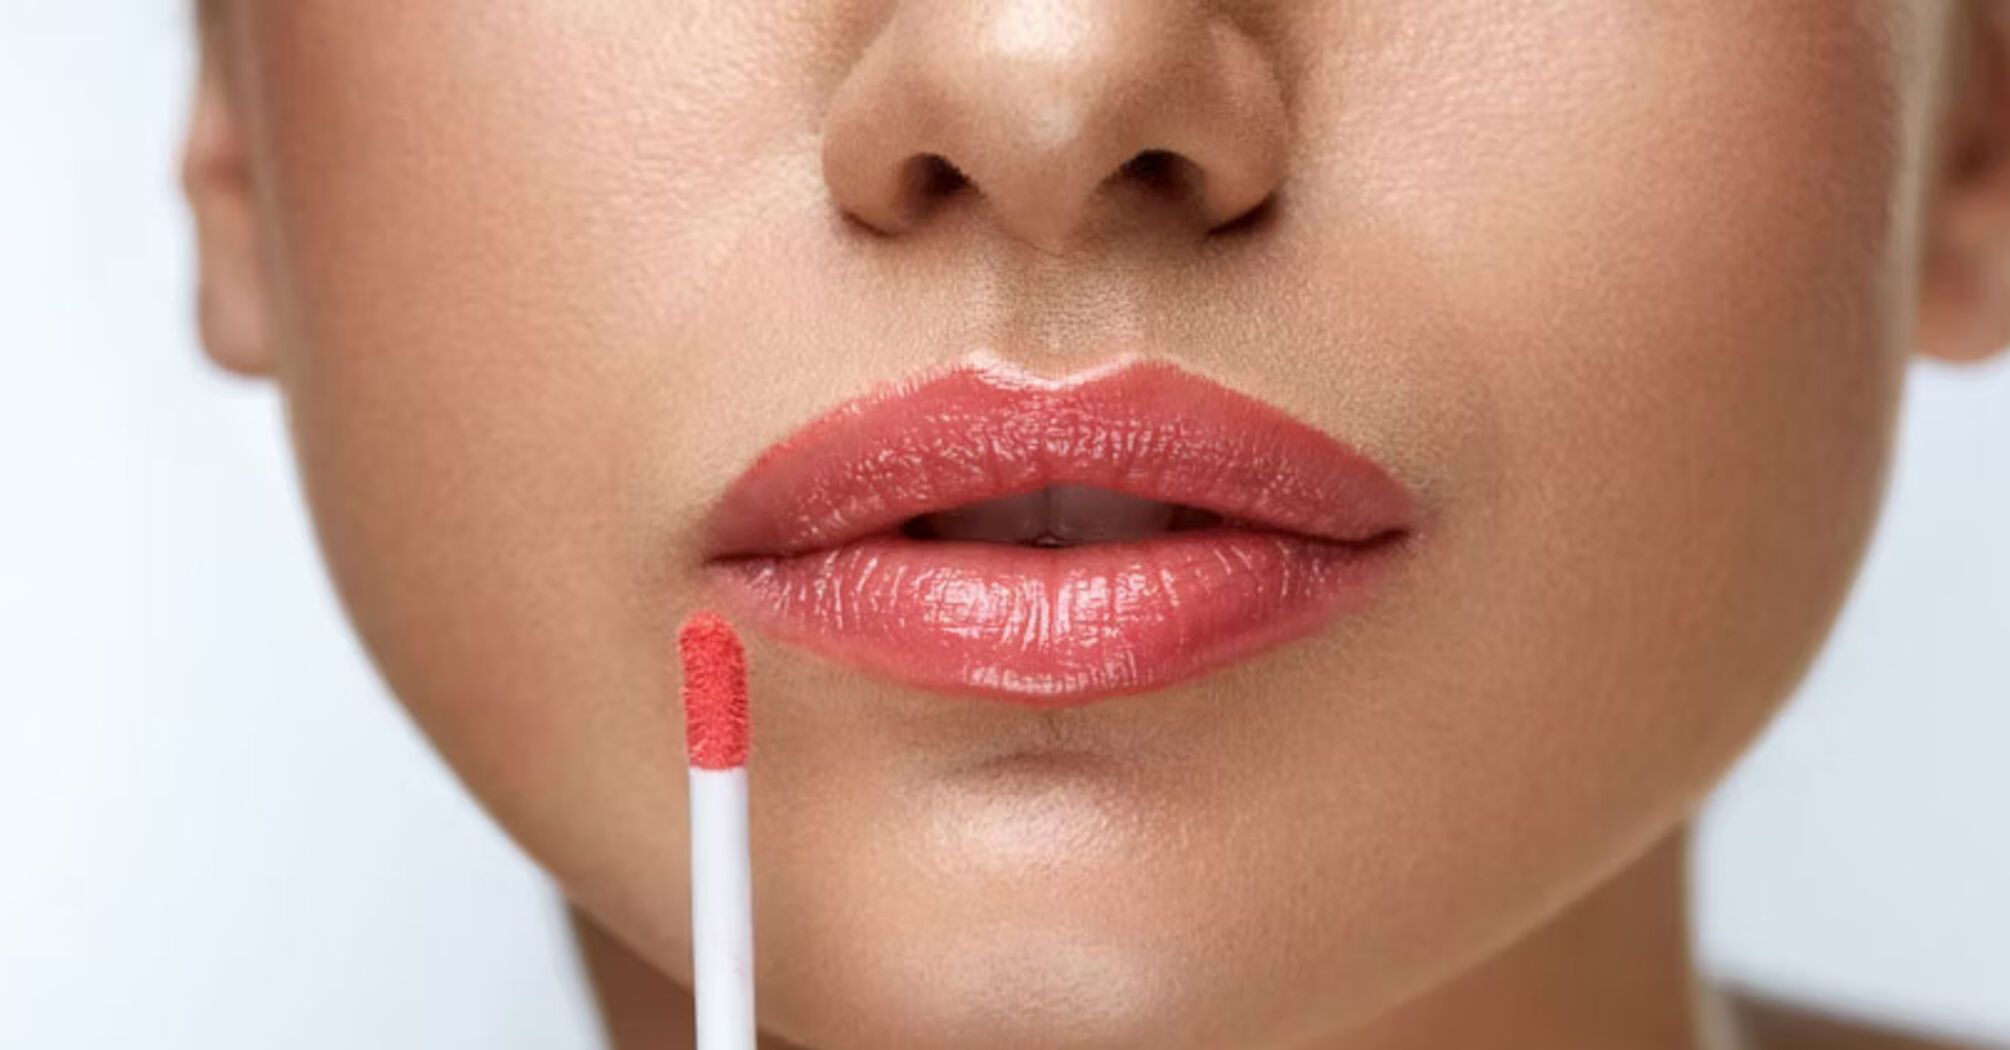 Create lip gloss of any color